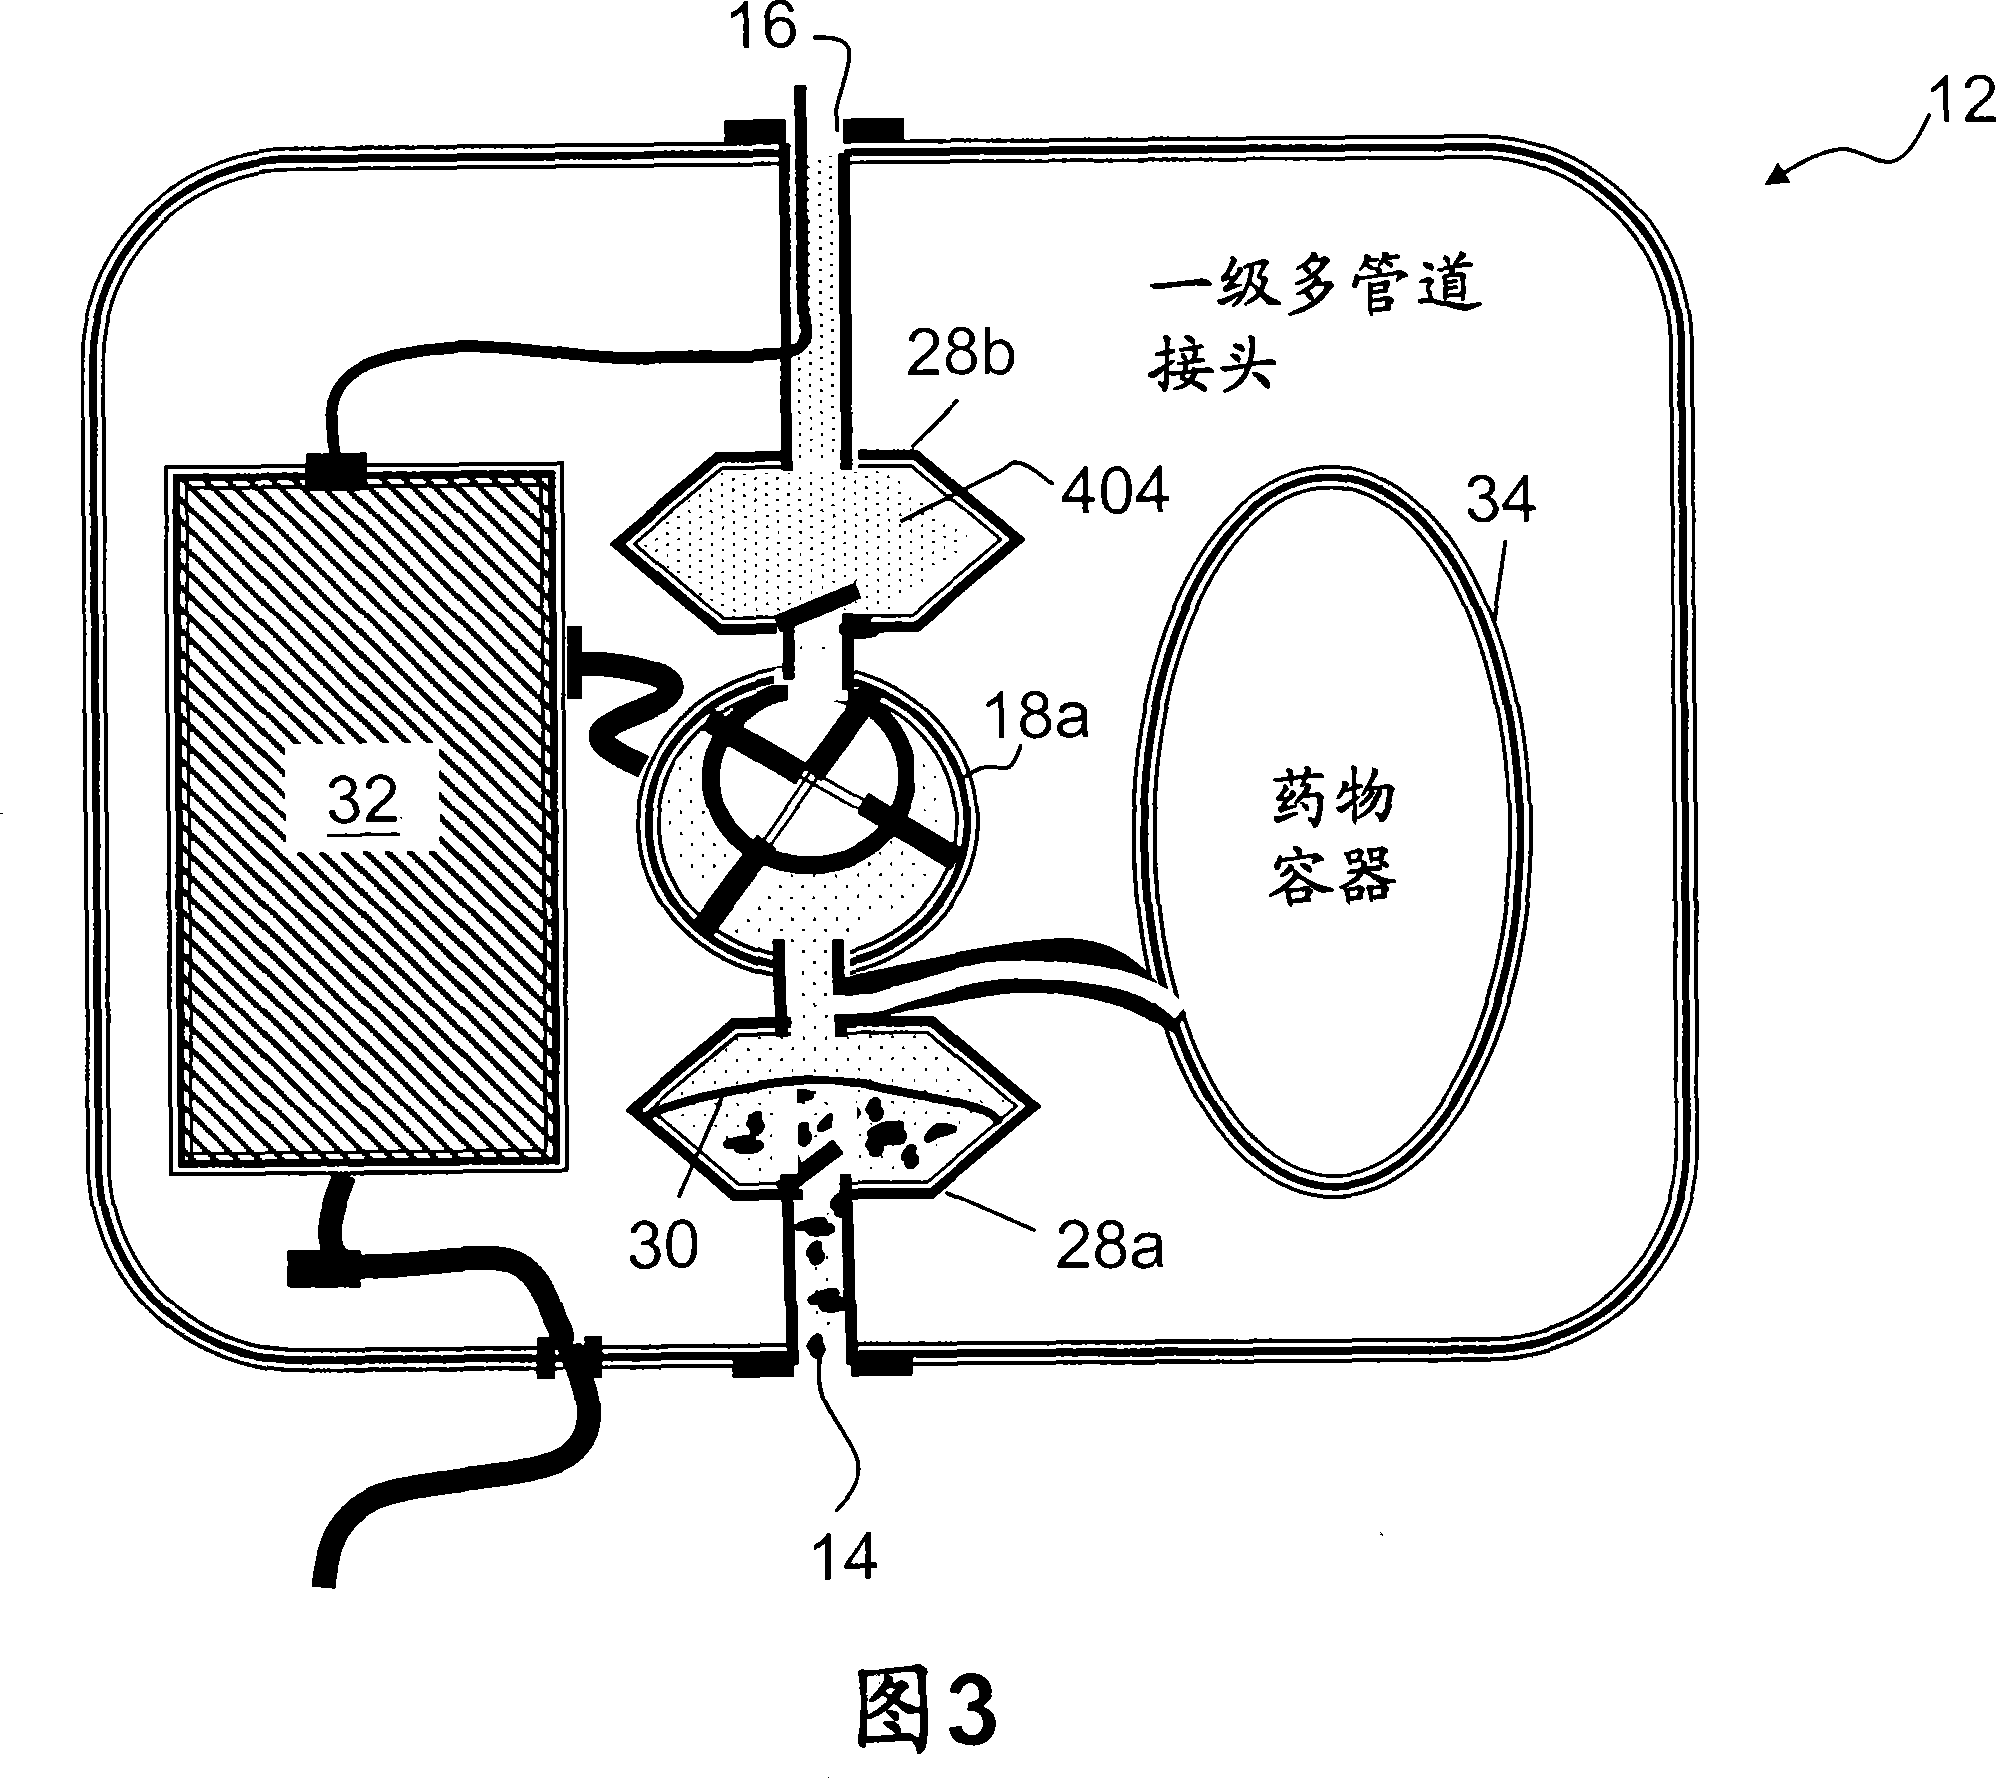 Device and method for eliminating sediment in veins of human and animals